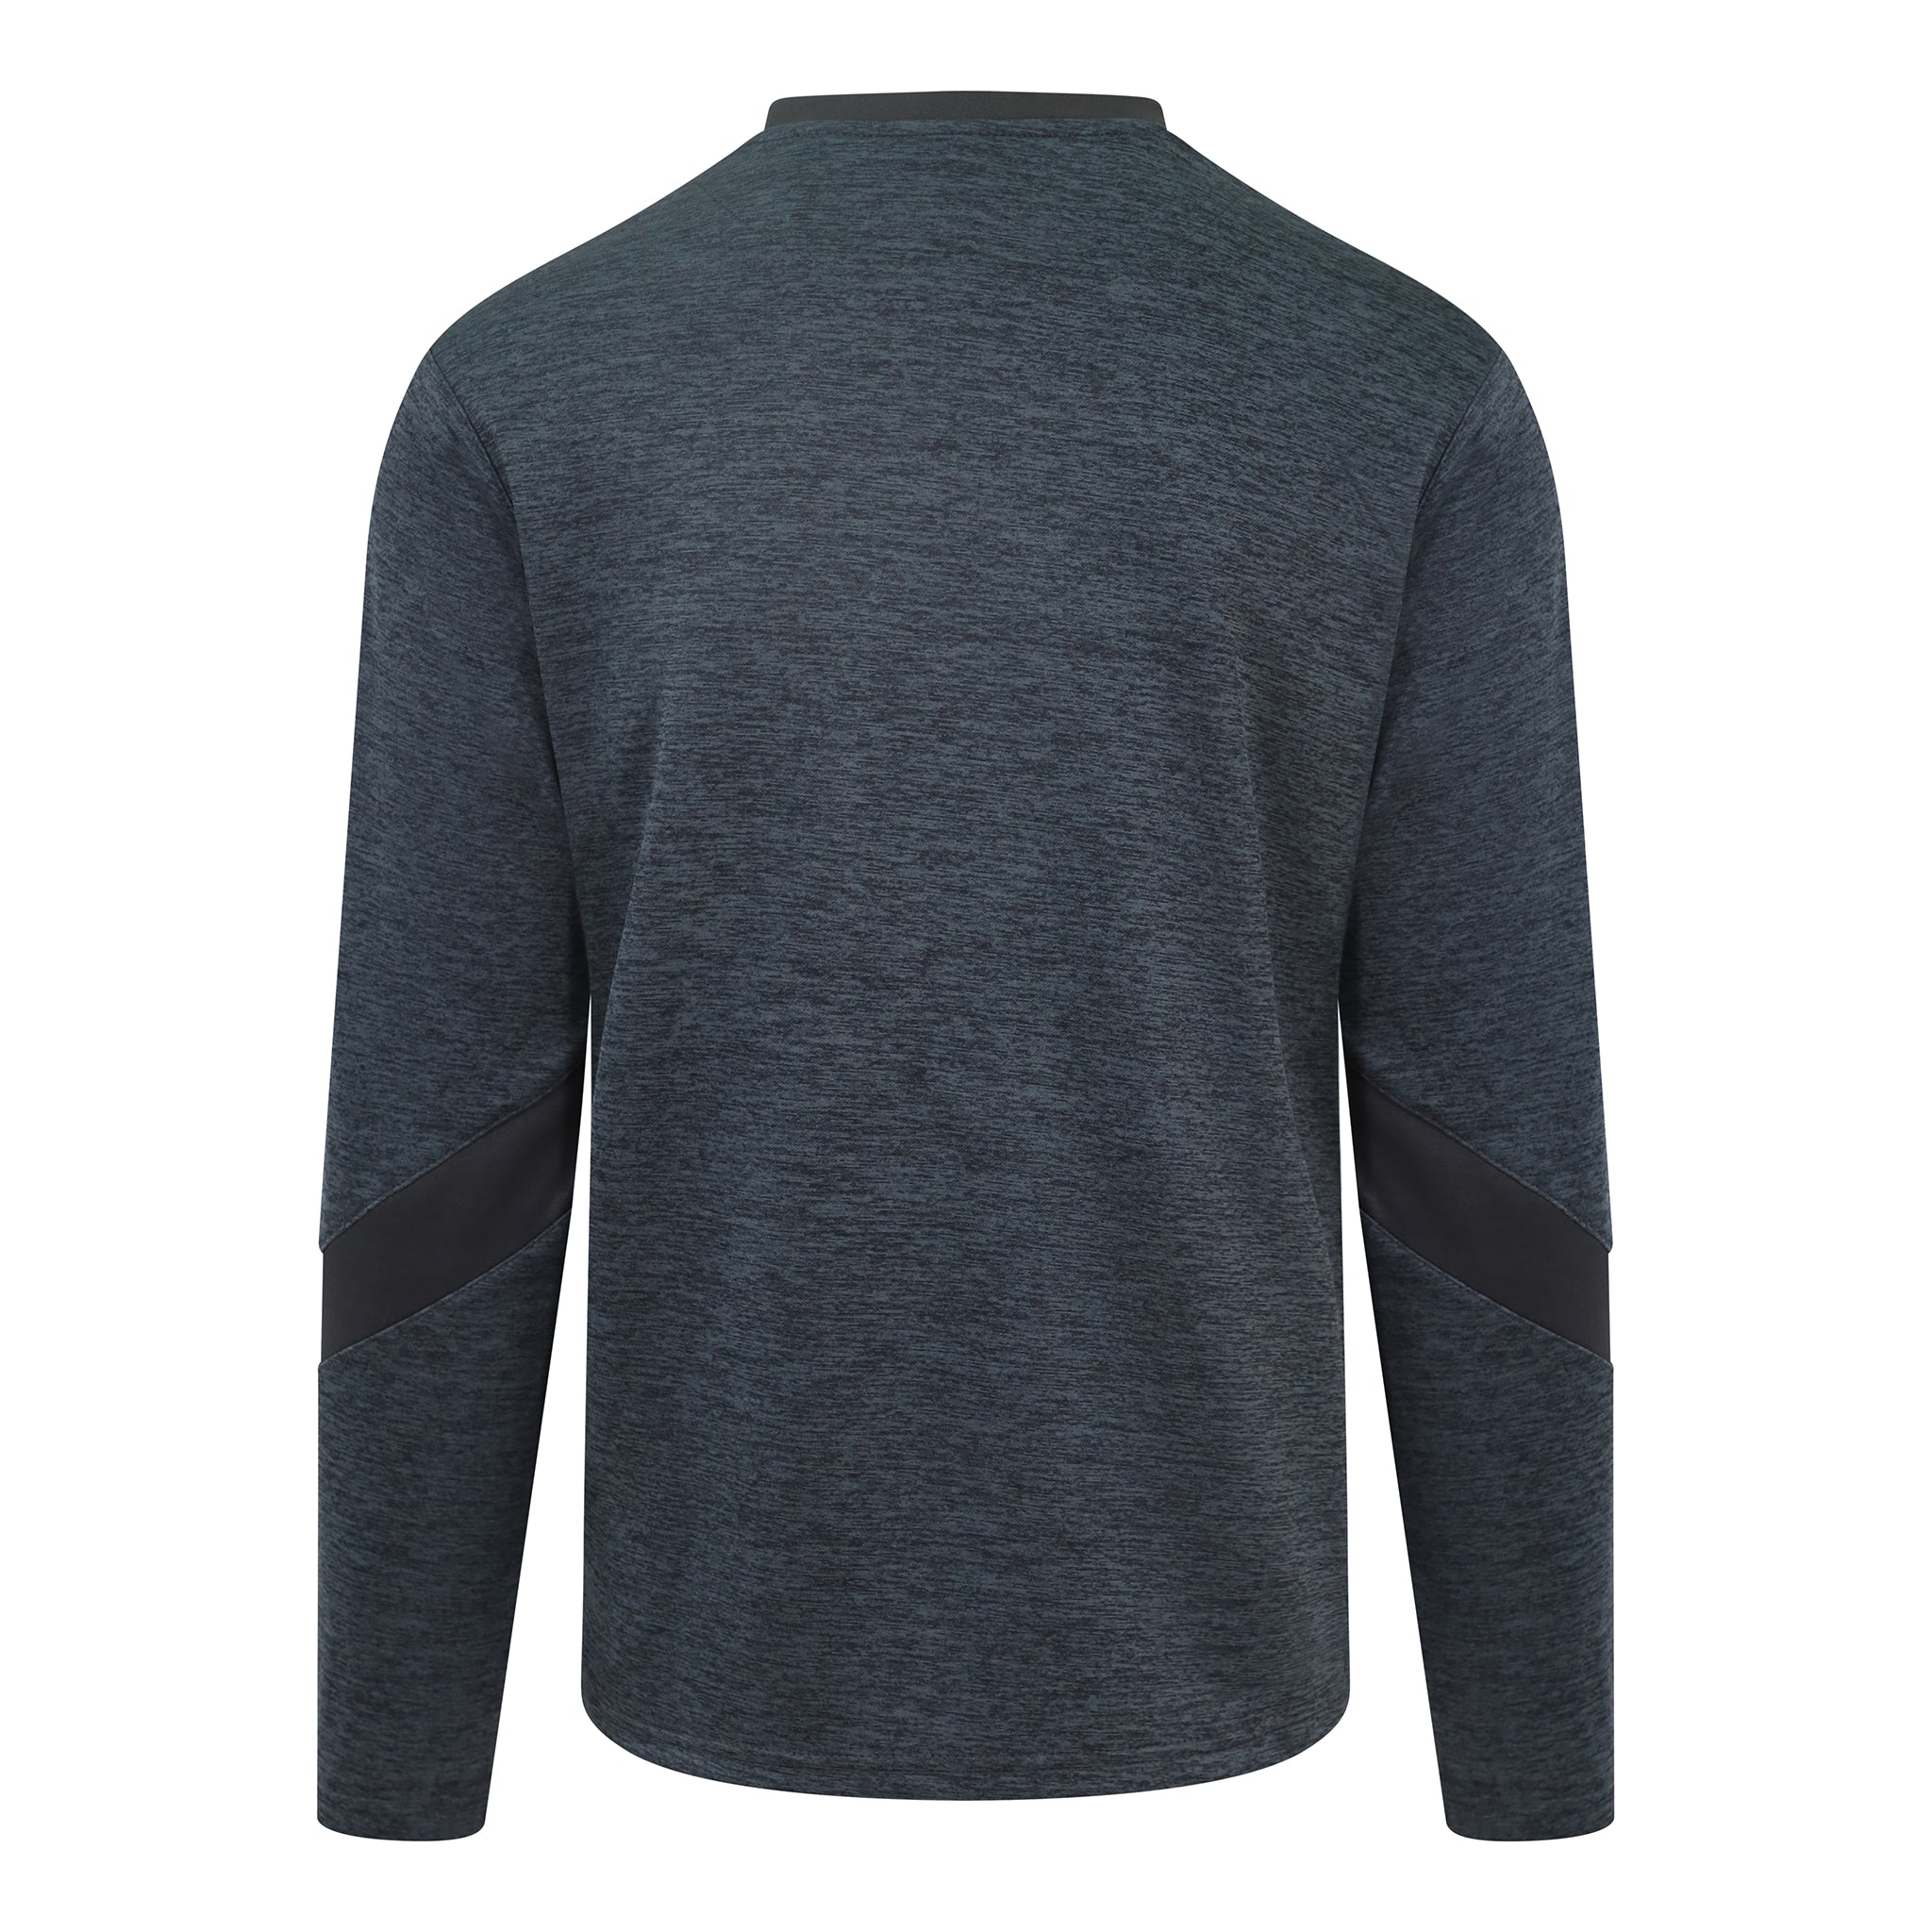 Mc Keever Core 22 Sweat Top - Youth - Charcoal